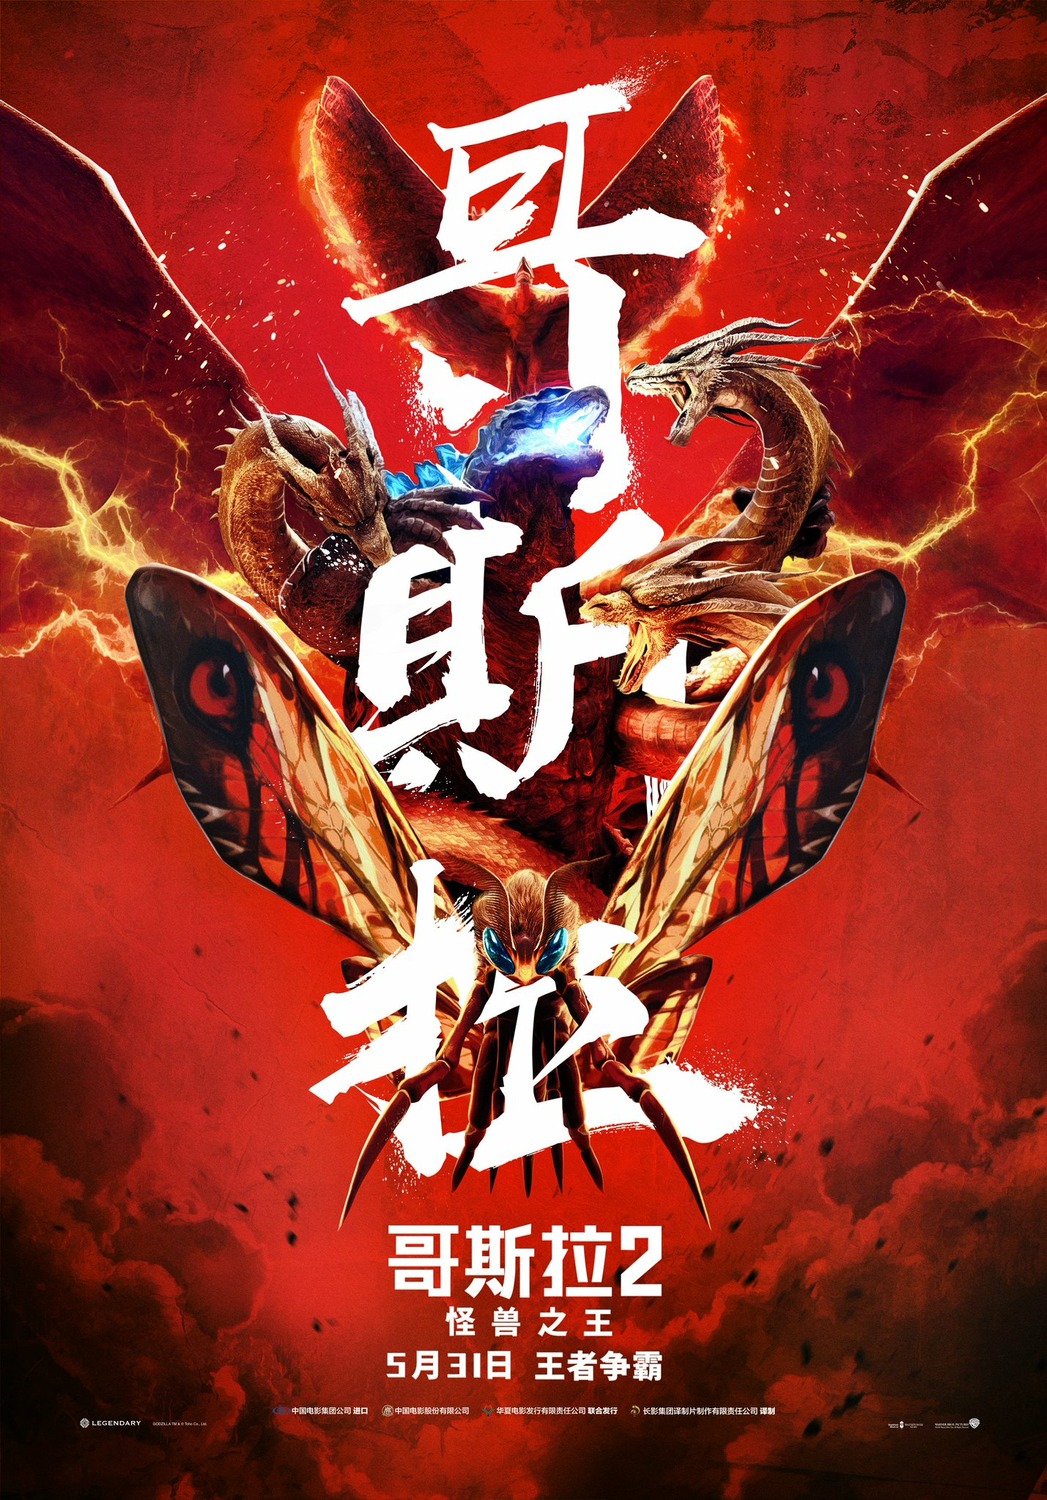 Extra Large Movie Poster Image for Godzilla: King of the Monsters (#23 of 27)